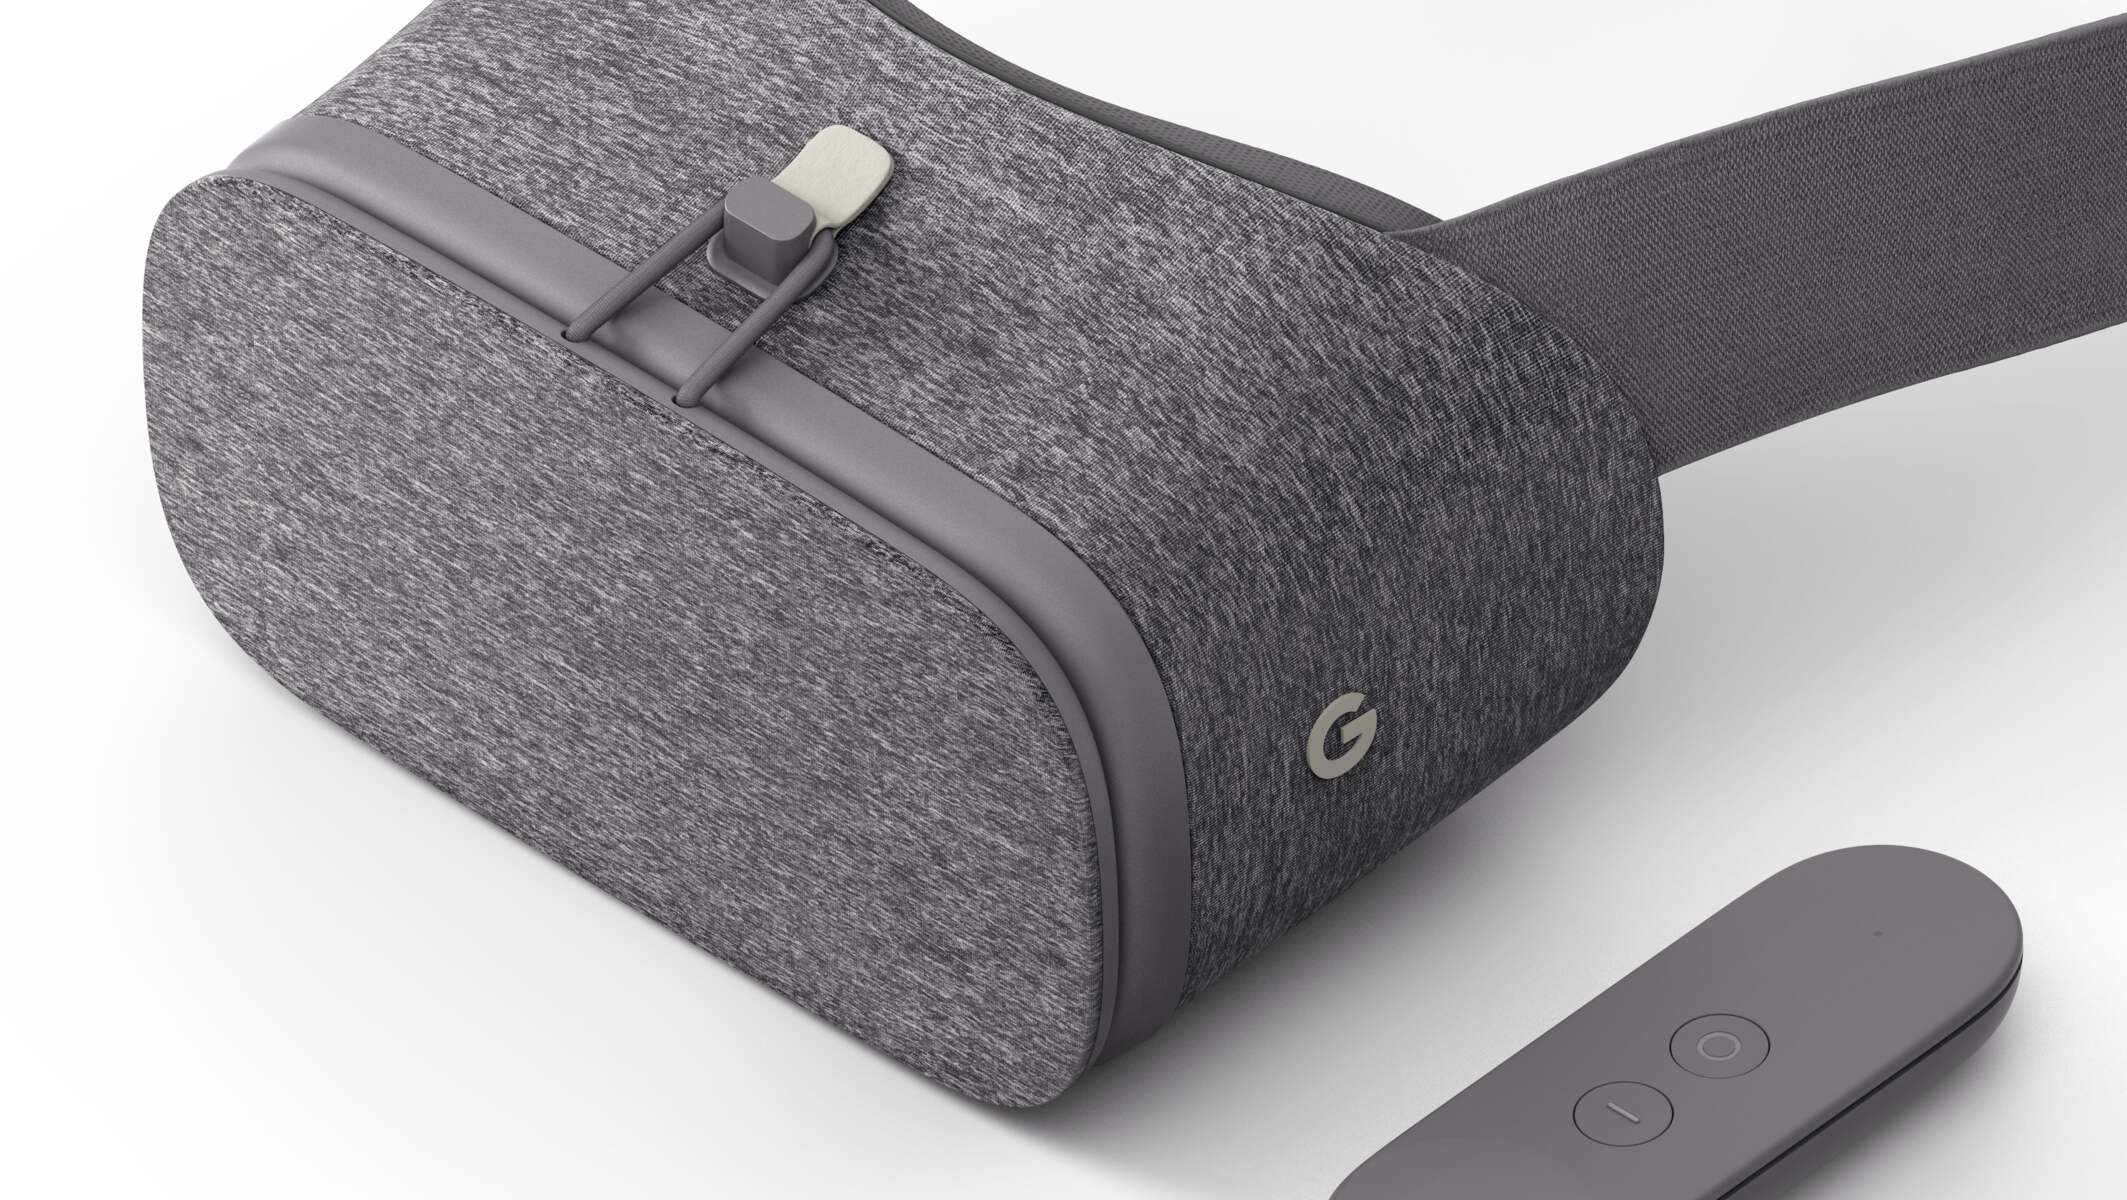 Dive Into Virtual Reality: Playing VR Games On Google Pixel 4